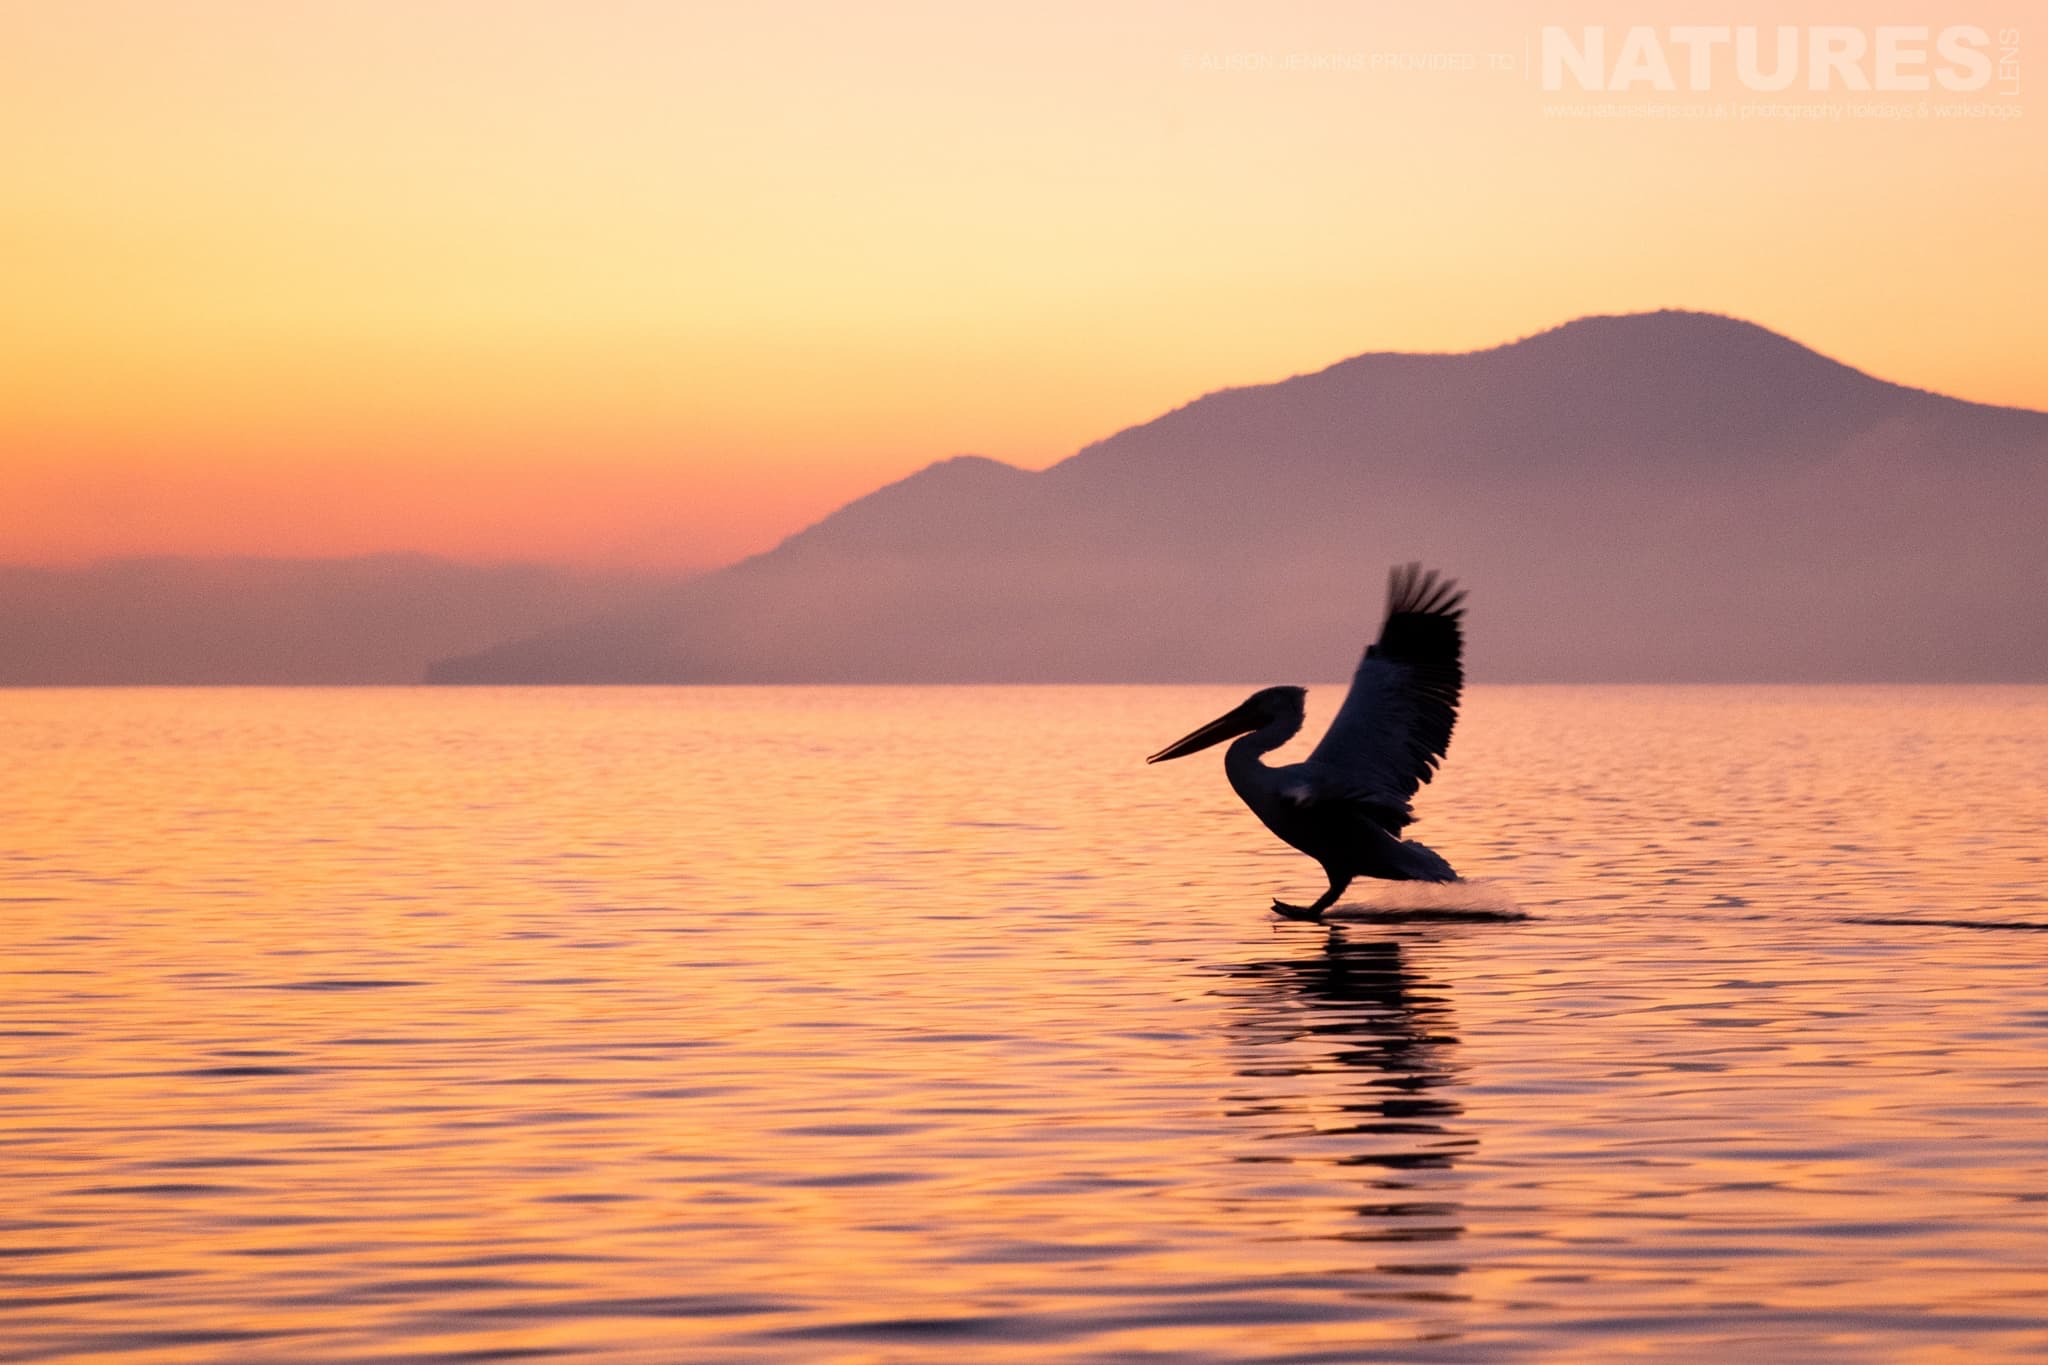 One Of The Magnificent Pelicans Of Lake Kerkini Landing On The Waters Of The Lake During Golden Hour Photographed During A Natureslens Wildlife Photography Holiday